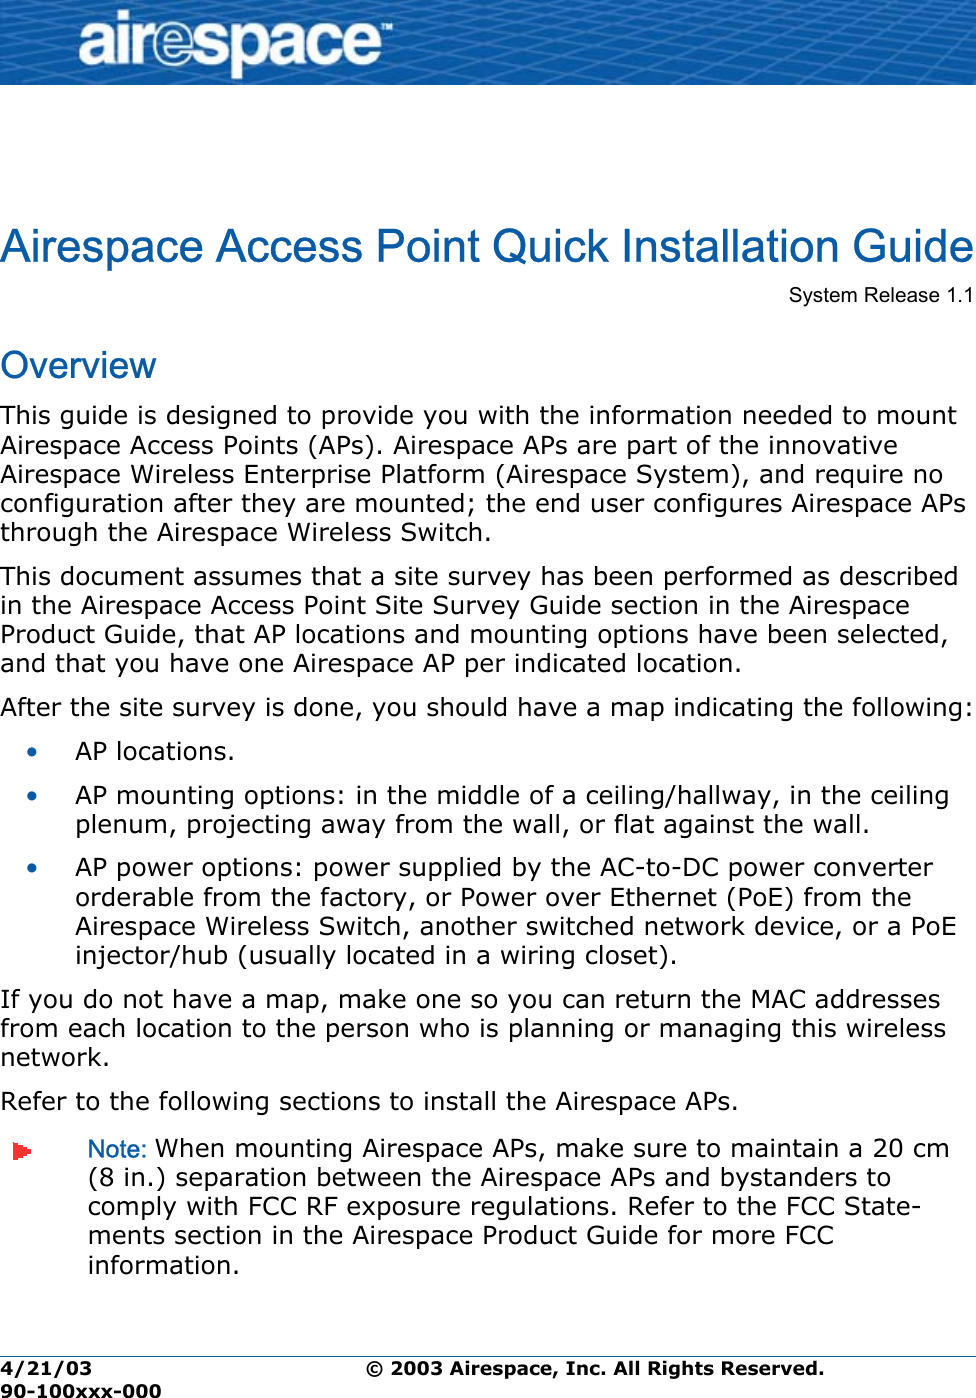 4/21/03 © 2003 Airespace, Inc. All Rights Reserved.  90-100xxx-000Airespace Access Point Quick Installation GuideAirespace Access Point Quick Installation GuideSystem Release 1.1  OverviewThis guide is designed to provide you with the information needed to mount Airespace Access Points (APs). Airespace APs are part of the innovative Airespace Wireless Enterprise Platform (Airespace System), and require no configuration after they are mounted; the end user configures Airespace APs through the Airespace Wireless Switch. This document assumes that a site survey has been performed as described in the Airespace Access Point Site Survey Guide section in the Airespace Product Guide, that AP locations and mounting options have been selected, and that you have one Airespace AP per indicated location. After the site survey is done, you should have a map indicating the following:•AP locations.•AP mounting options: in the middle of a ceiling/hallway, in the ceiling plenum, projecting away from the wall, or flat against the wall.•AP power options: power supplied by the AC-to-DC power converter orderable from the factory, or Power over Ethernet (PoE) from the Airespace Wireless Switch, another switched network device, or a PoE injector/hub (usually located in a wiring closet).If you do not have a map, make one so you can return the MAC addresses from each location to the person who is planning or managing this wireless network.Refer to the following sections to install the Airespace APs.Note: When mounting Airespace APs, make sure to maintain a 20 cm (8 in.) separation between the Airespace APs and bystanders to comply with FCC RF exposure regulations. Refer to the FCC State-ments section in the Airespace Product Guide for more FCC information.